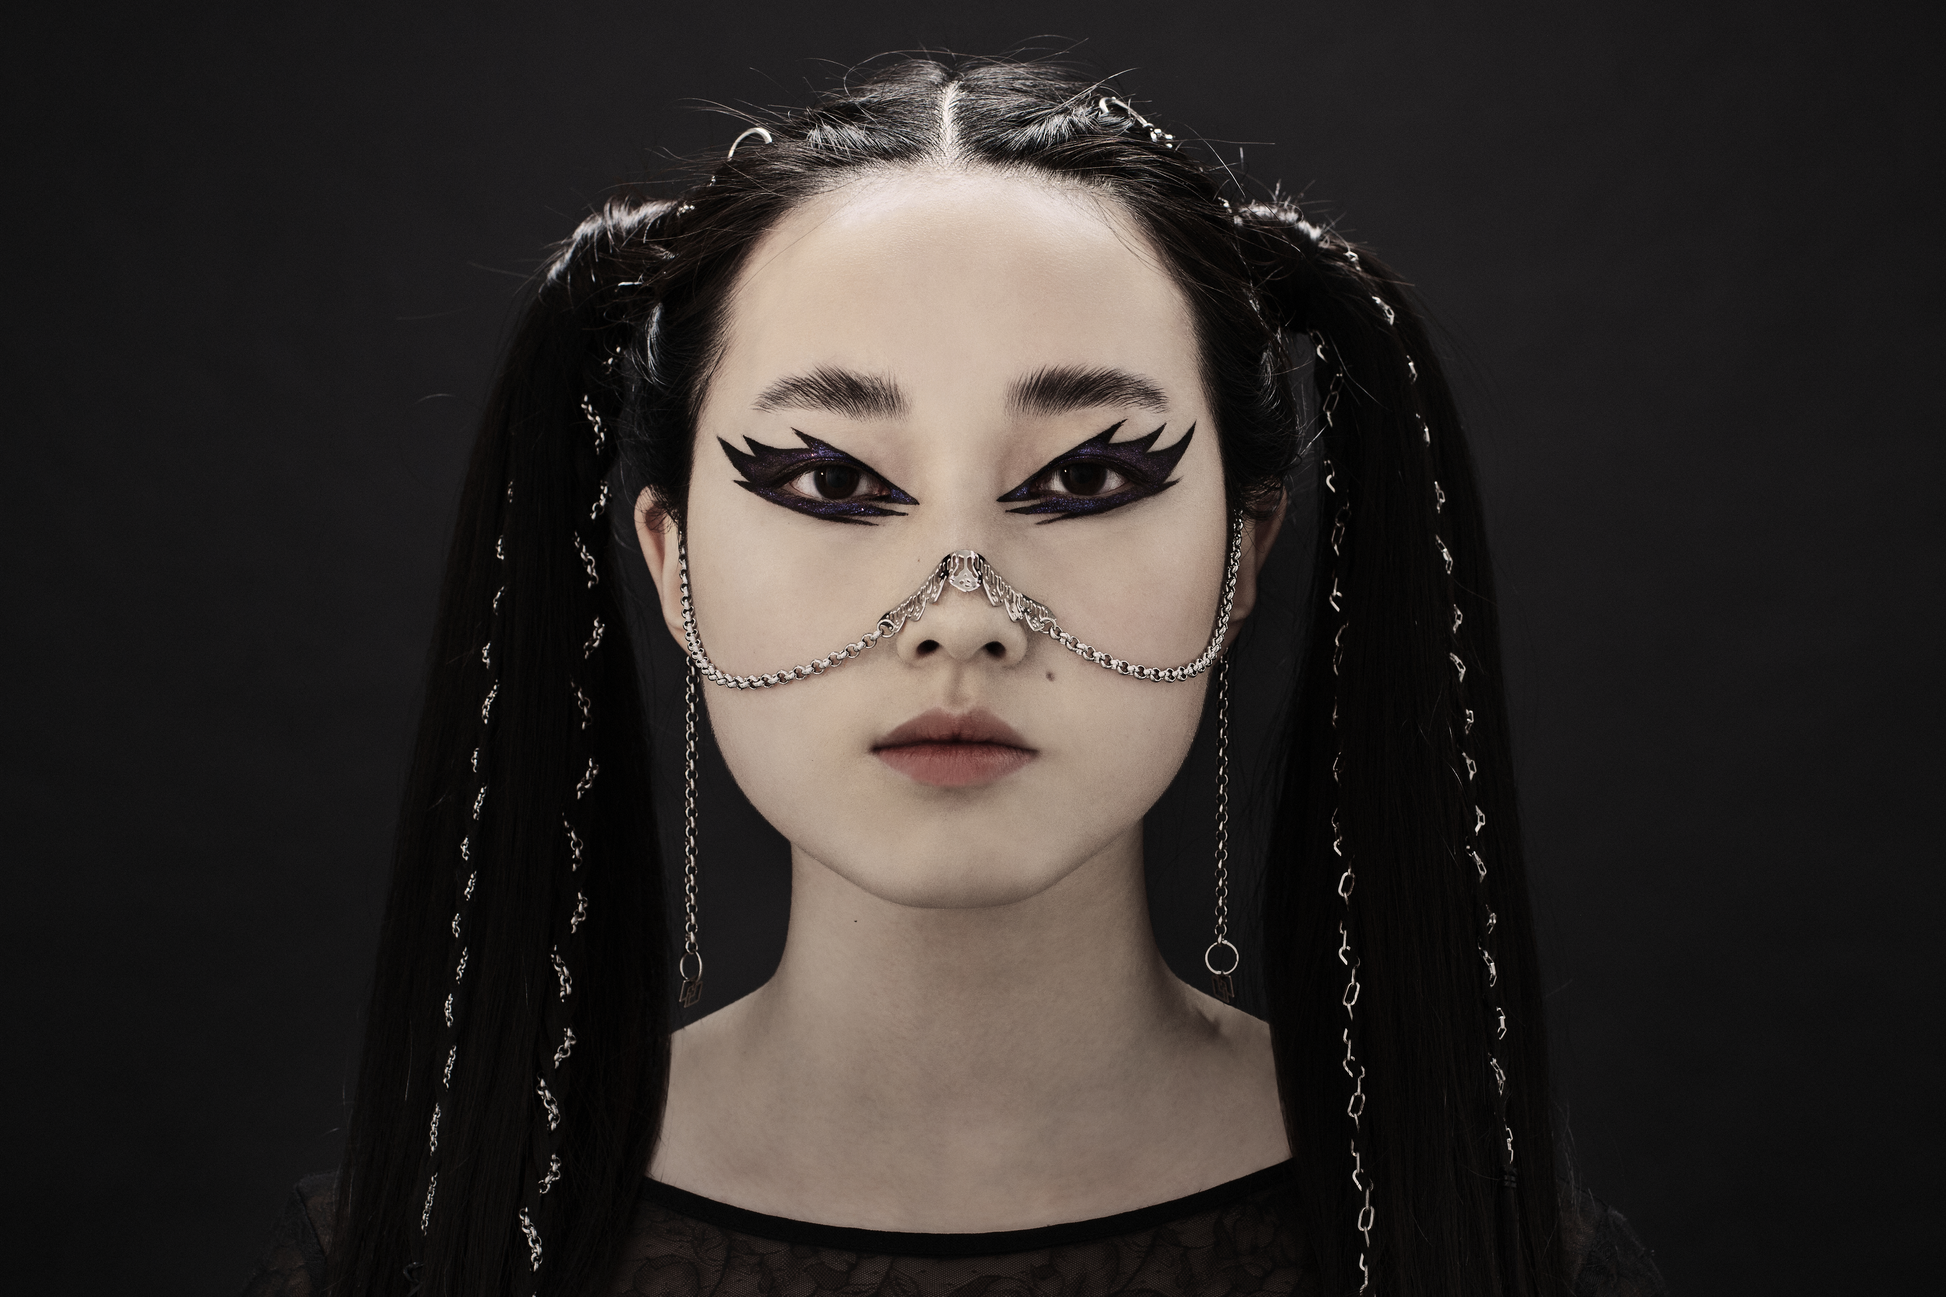 A model exudes dark elegance with a Myril Jewels nose chain, a statement piece evoking neo-gothic and witchcore vibes. Perfect for gothic-chic fashion, it's an ideal accessory for Halloween, festivals, or bold everyday wear, and makes a striking goth girlfriend gift.